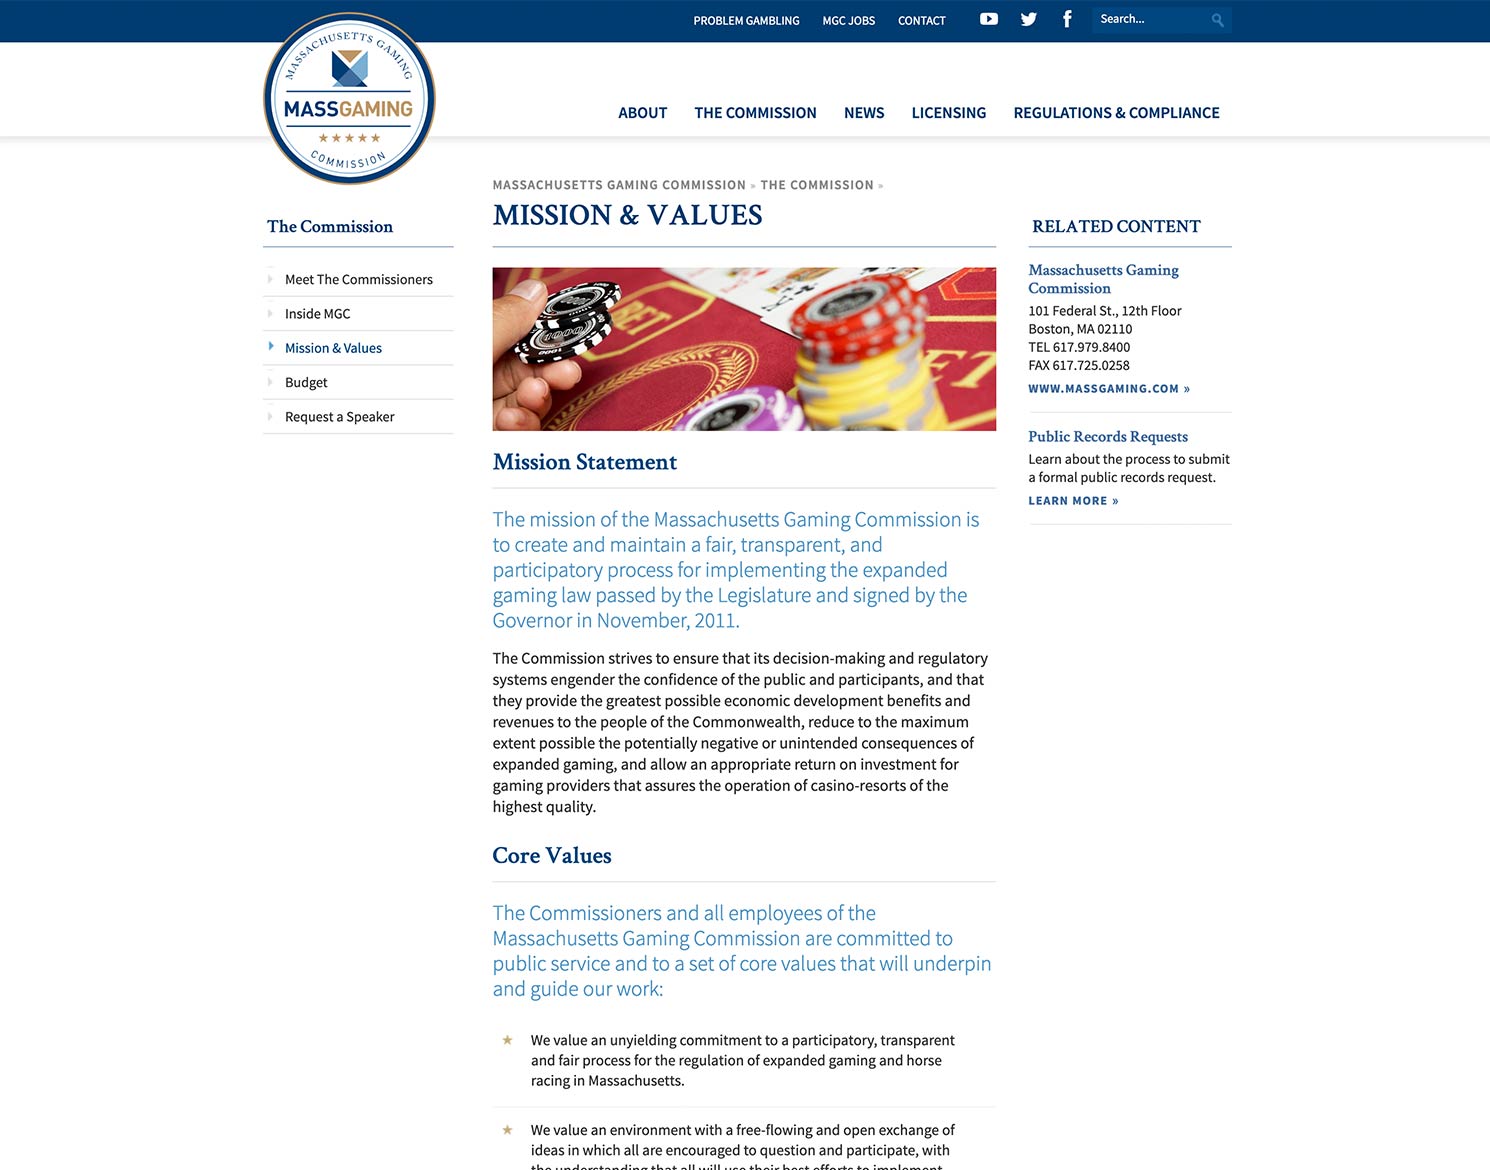 Massachusetts Gaming Commission website - Detail page